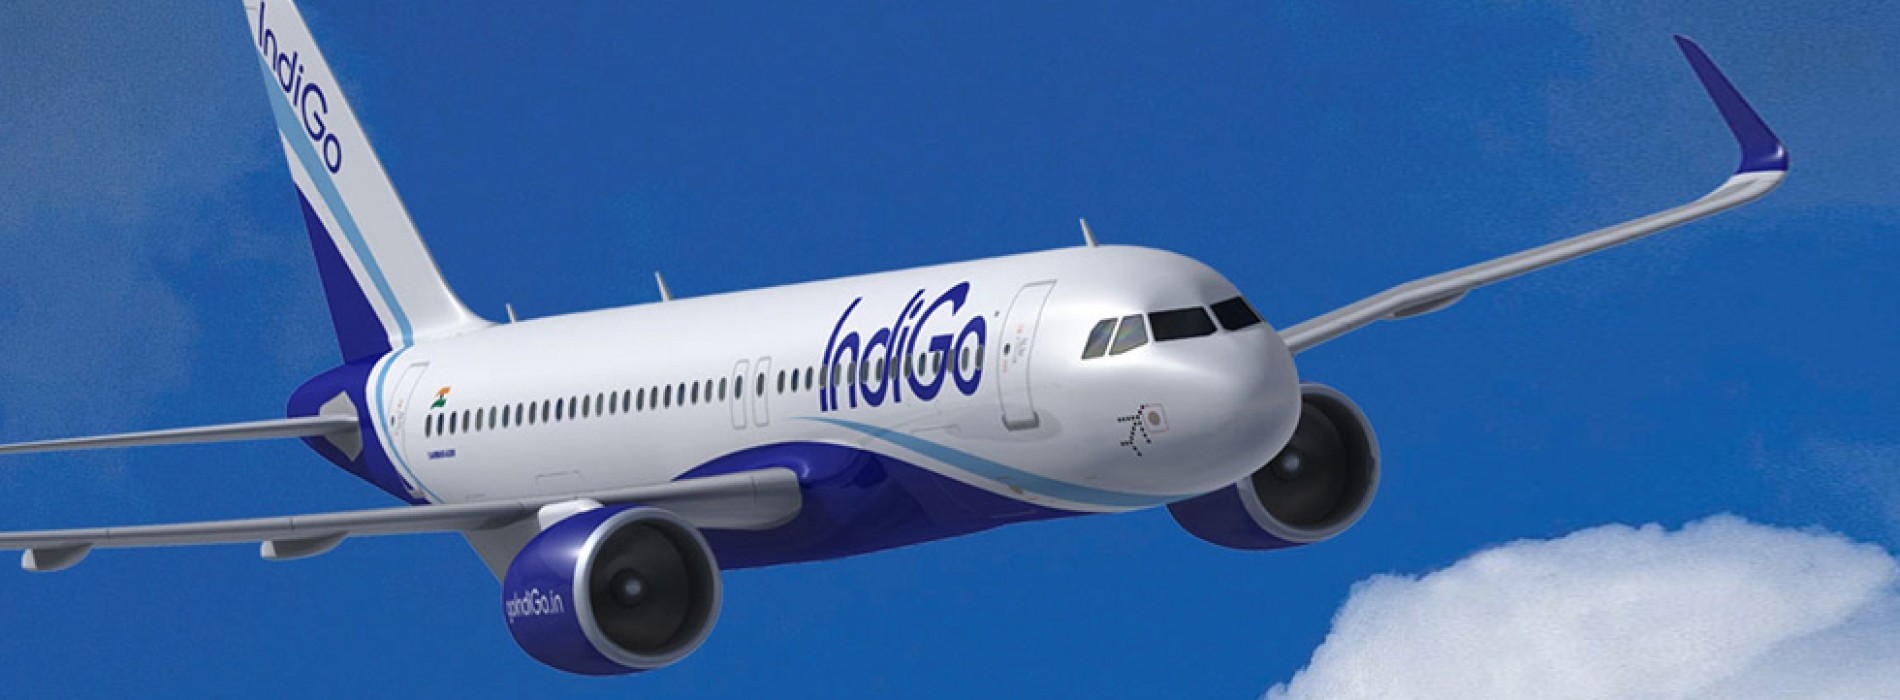 IndiGo to soon operate direct daily flights to Colombo